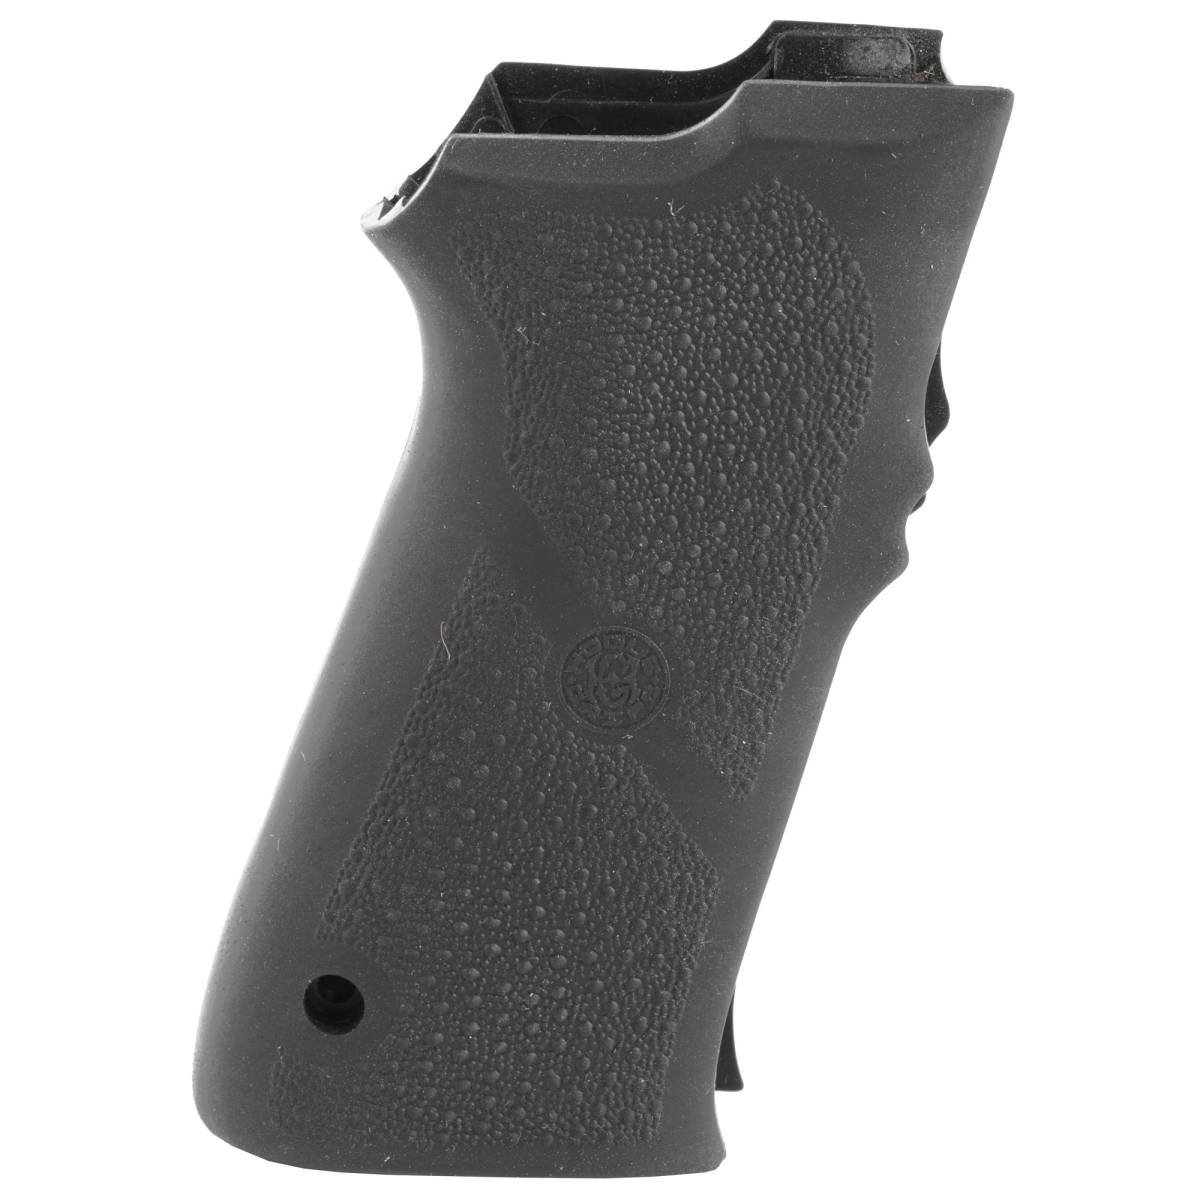 Hogue 40010 Grip Panels Black Rubber for S&W 5906, 4006-img-1